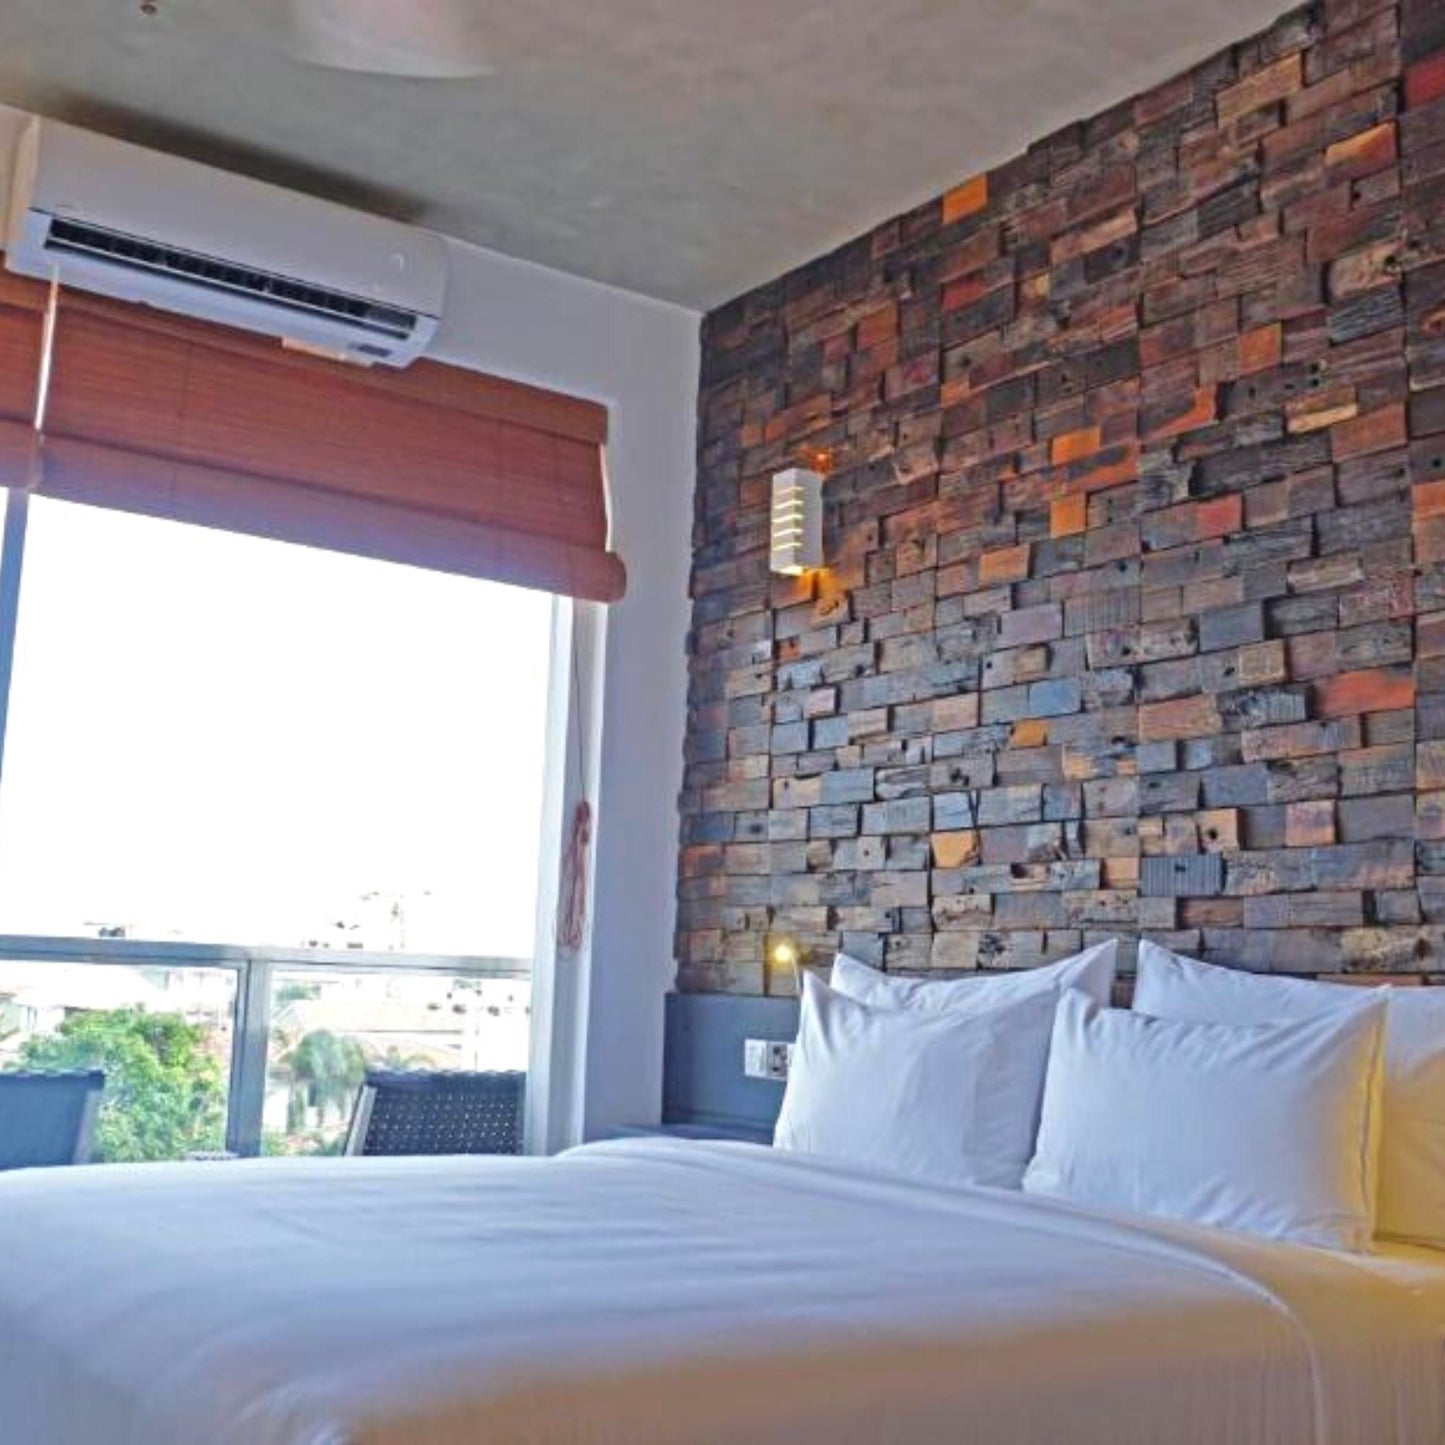 Day-stay package for 2 people: Deluxe room, 3-course meals, rooftop bar with a sea view & pool with a Jacuzzi